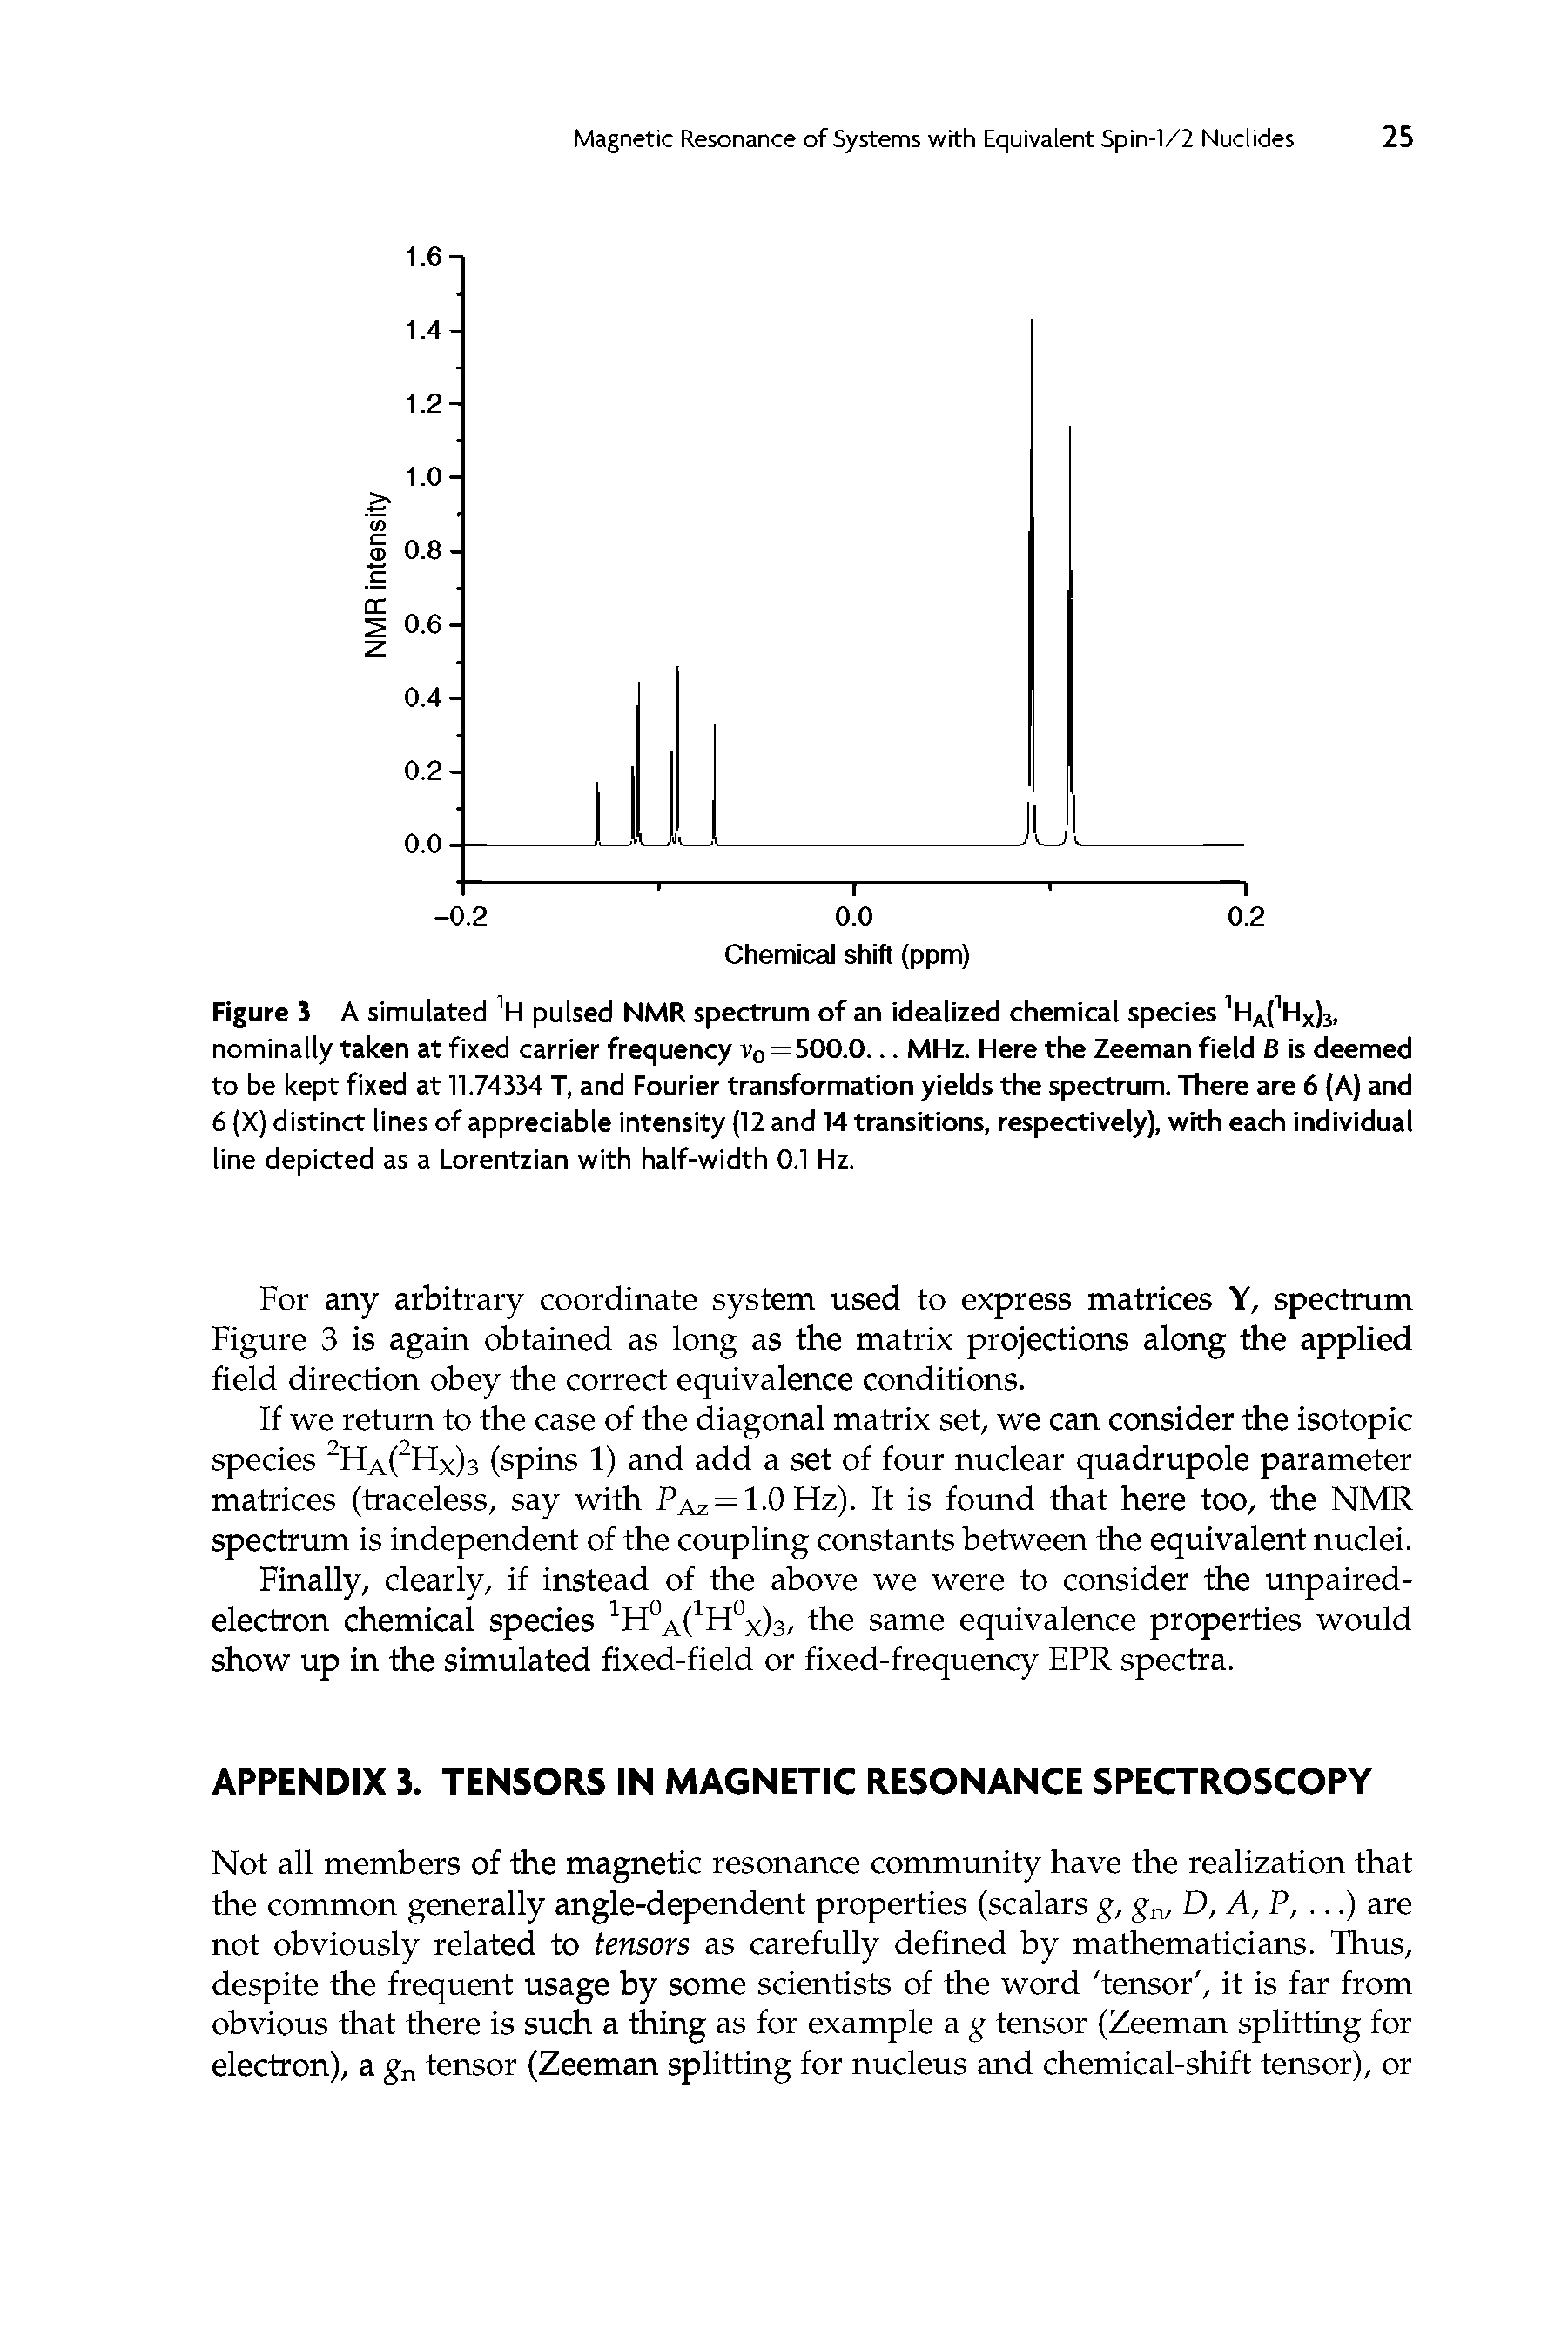 Figure J A simulated H pulsed NMR spectrum of an idealized chemical species H Hx, nominally taken at fixed carrier frequency v0=500.0... MHz. Here the Zeeman field B is deemed to be kept fixed at 11.74334 T, and Fourier transformation yields the spectrum. There are 6 (A) and 6 (X) distinct lines of appreciable intensity (12 and 14 transitions, respectively), with each individual line depicted as a Lorentzian with half-width 0.1 Hz.